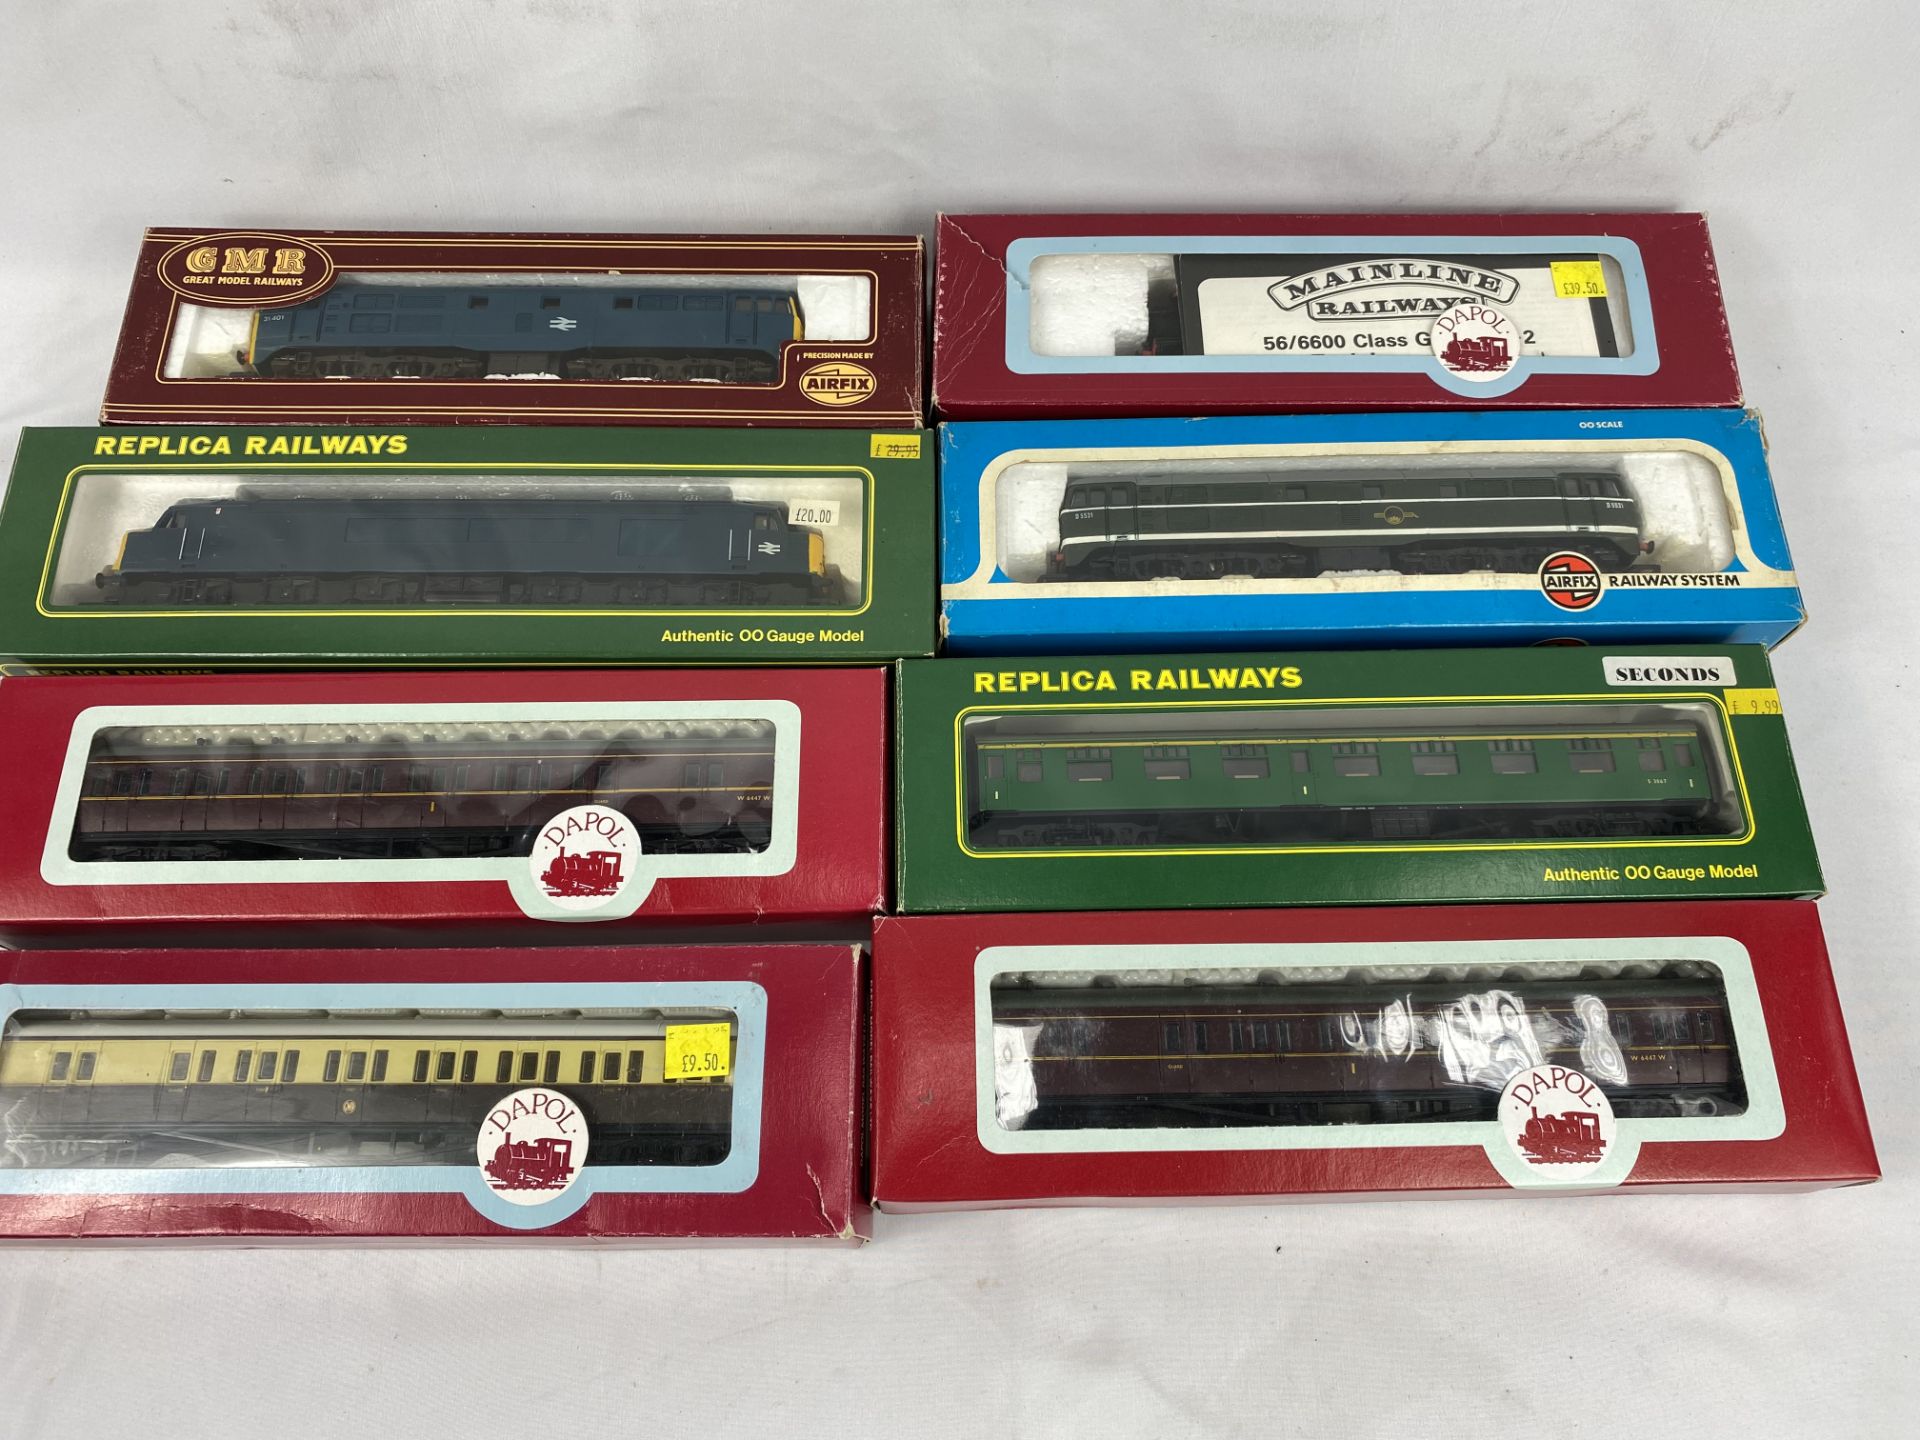 Four boxed 00 gauge locomotives together with four carriages